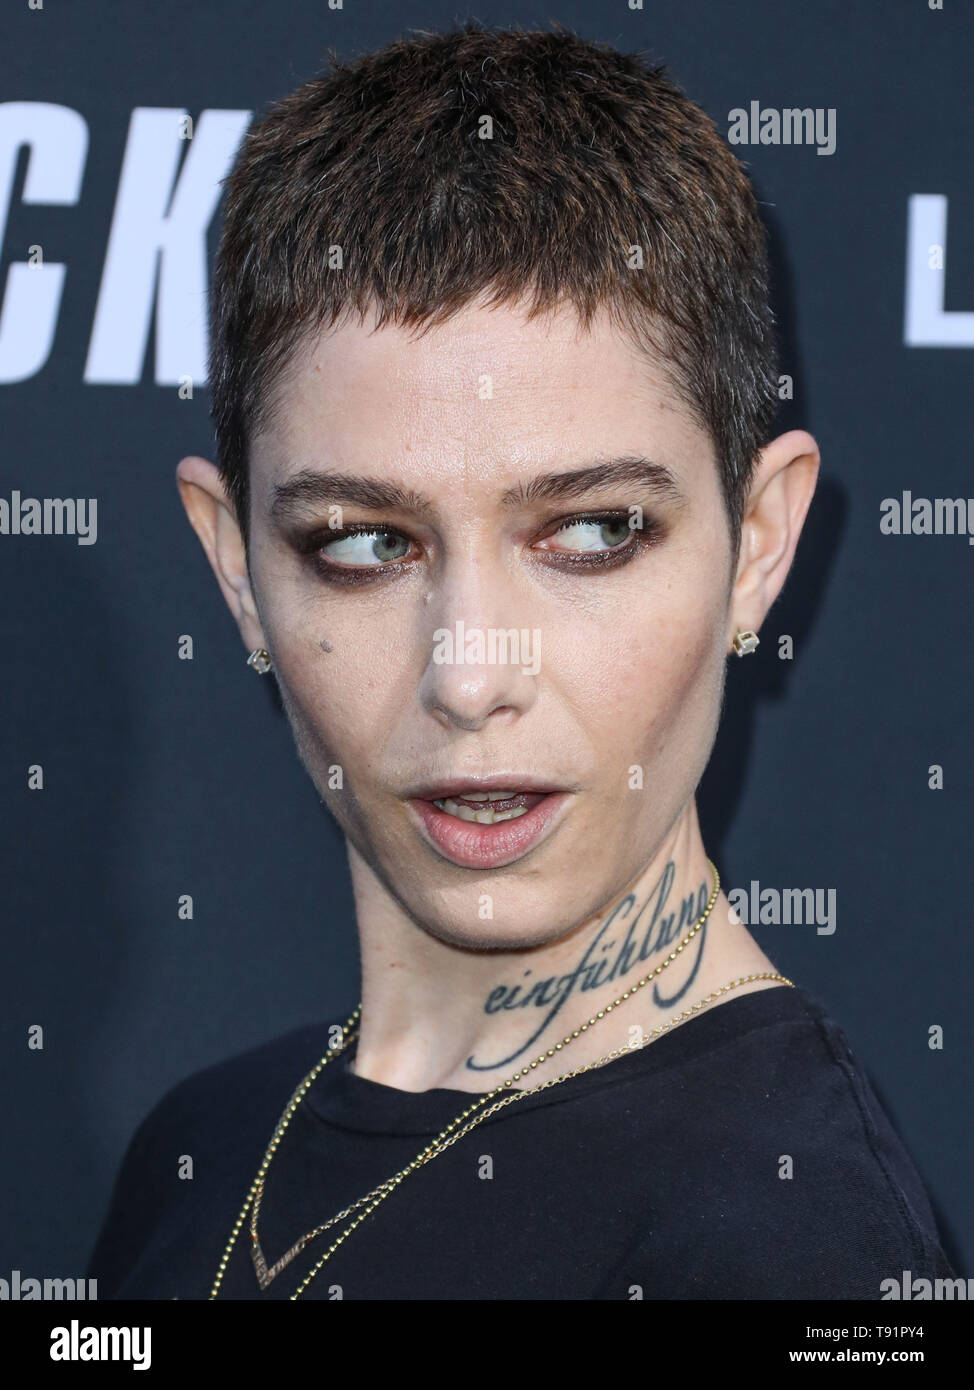 HOLLYWOOD, LOS ANGELES, CALIFORNIA, USA - MAY 15: Actress Asia Kate Dillon arrives at the Los Angeles Special Screening Of Lionsgate's 'John Wick: Chapter 3 - Parabellum' held at the TCL Chinese Theatre IMAX on May 15, 2019 in Los Angeles, California, United States. (Photo by Xavier Collin/Image Press Agency) Stock Photo